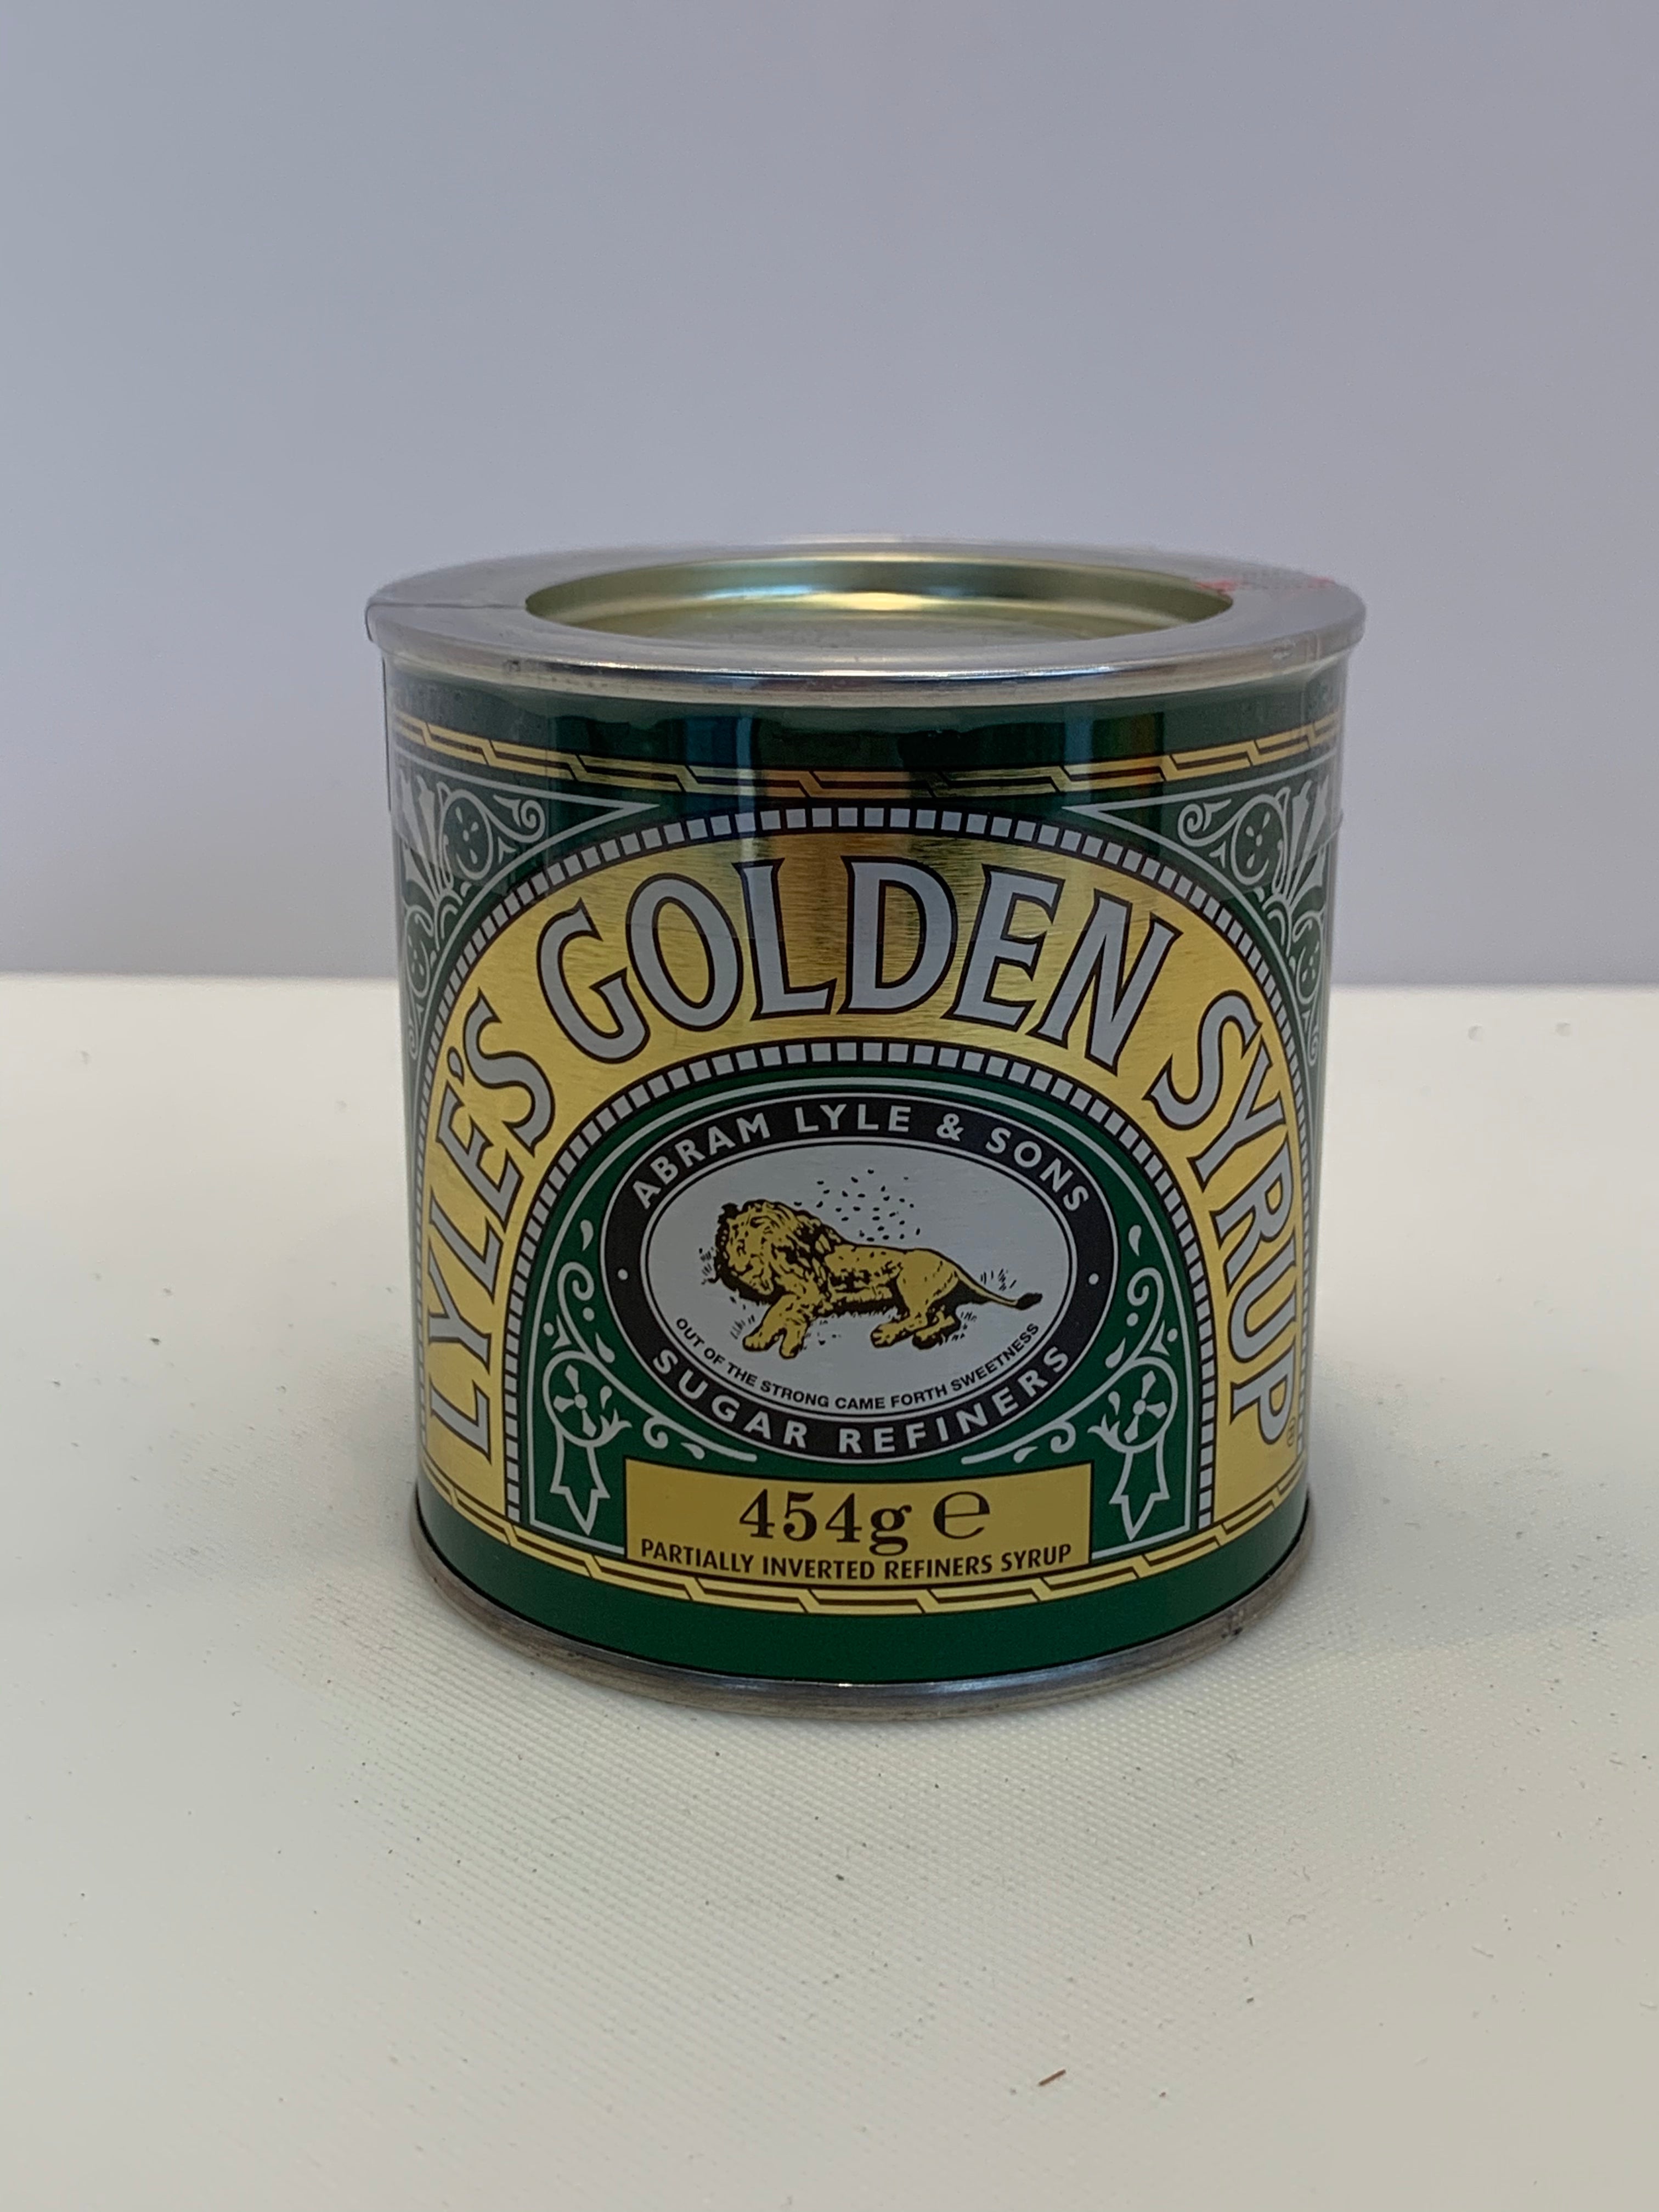 Lyle's Golden Syrup – Cardullo's Gourmet Shoppe